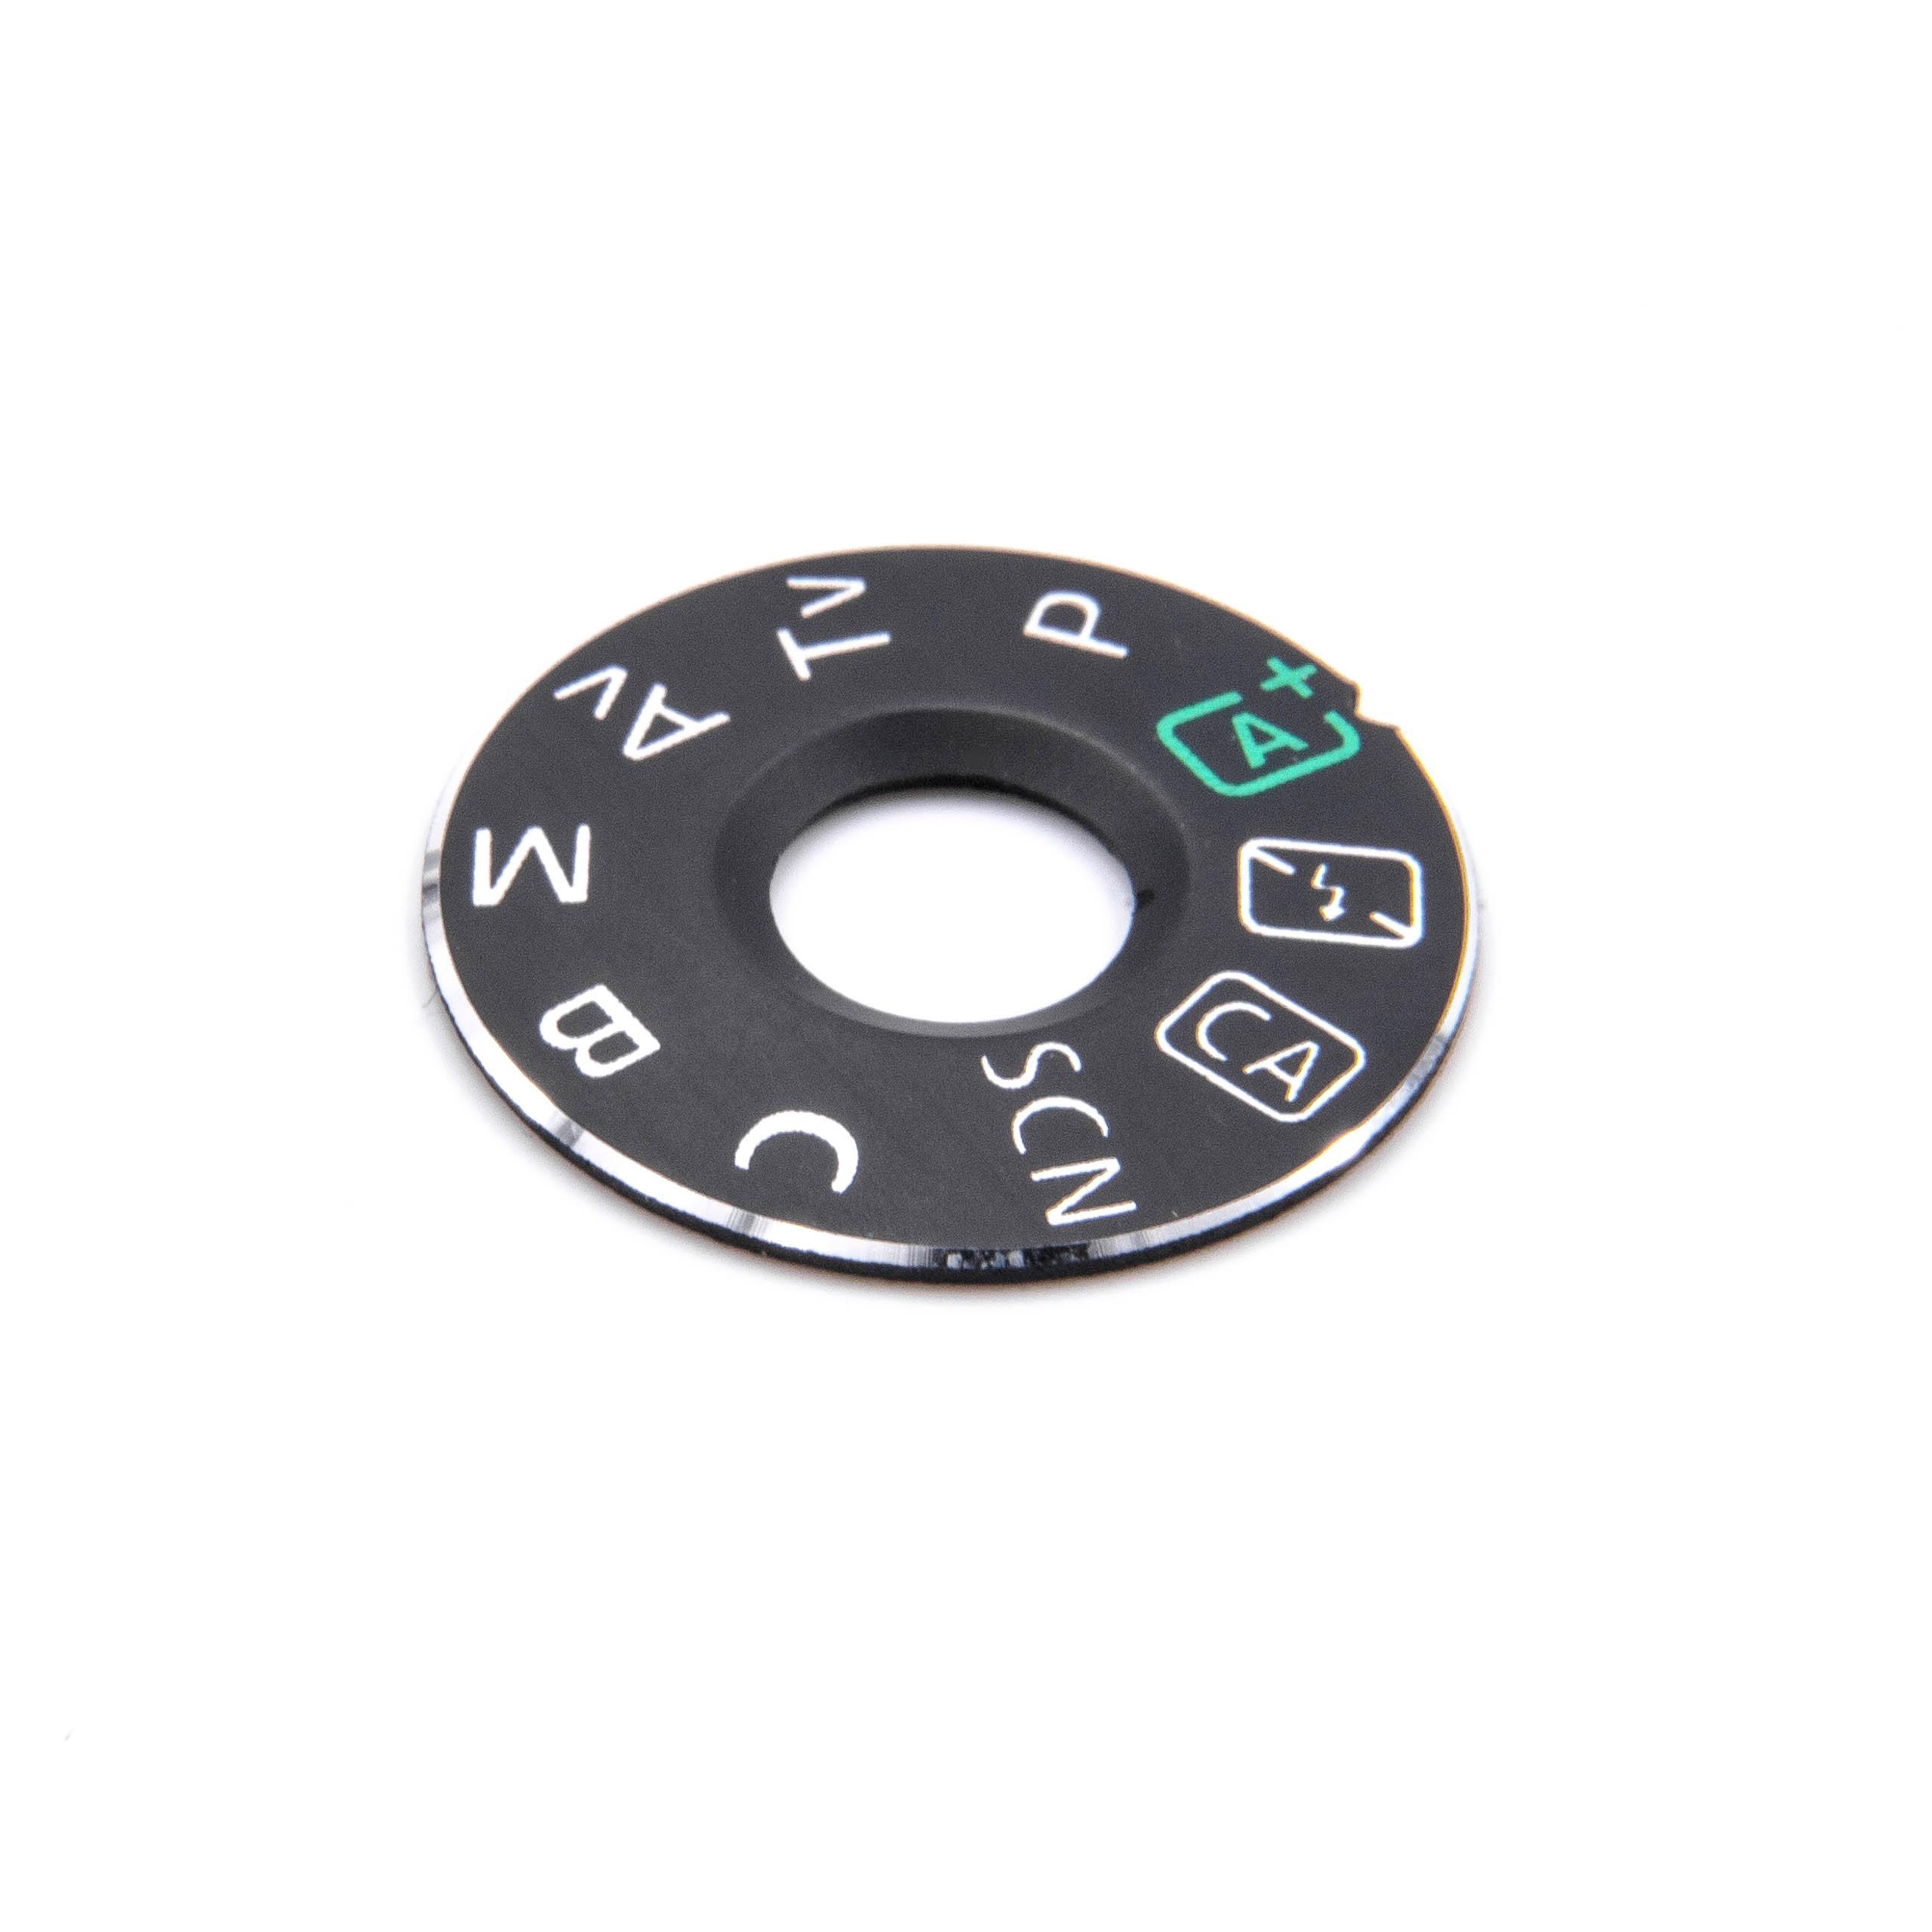 Dial Mode Plate suitable for Canon EOS 70D Digital Camera